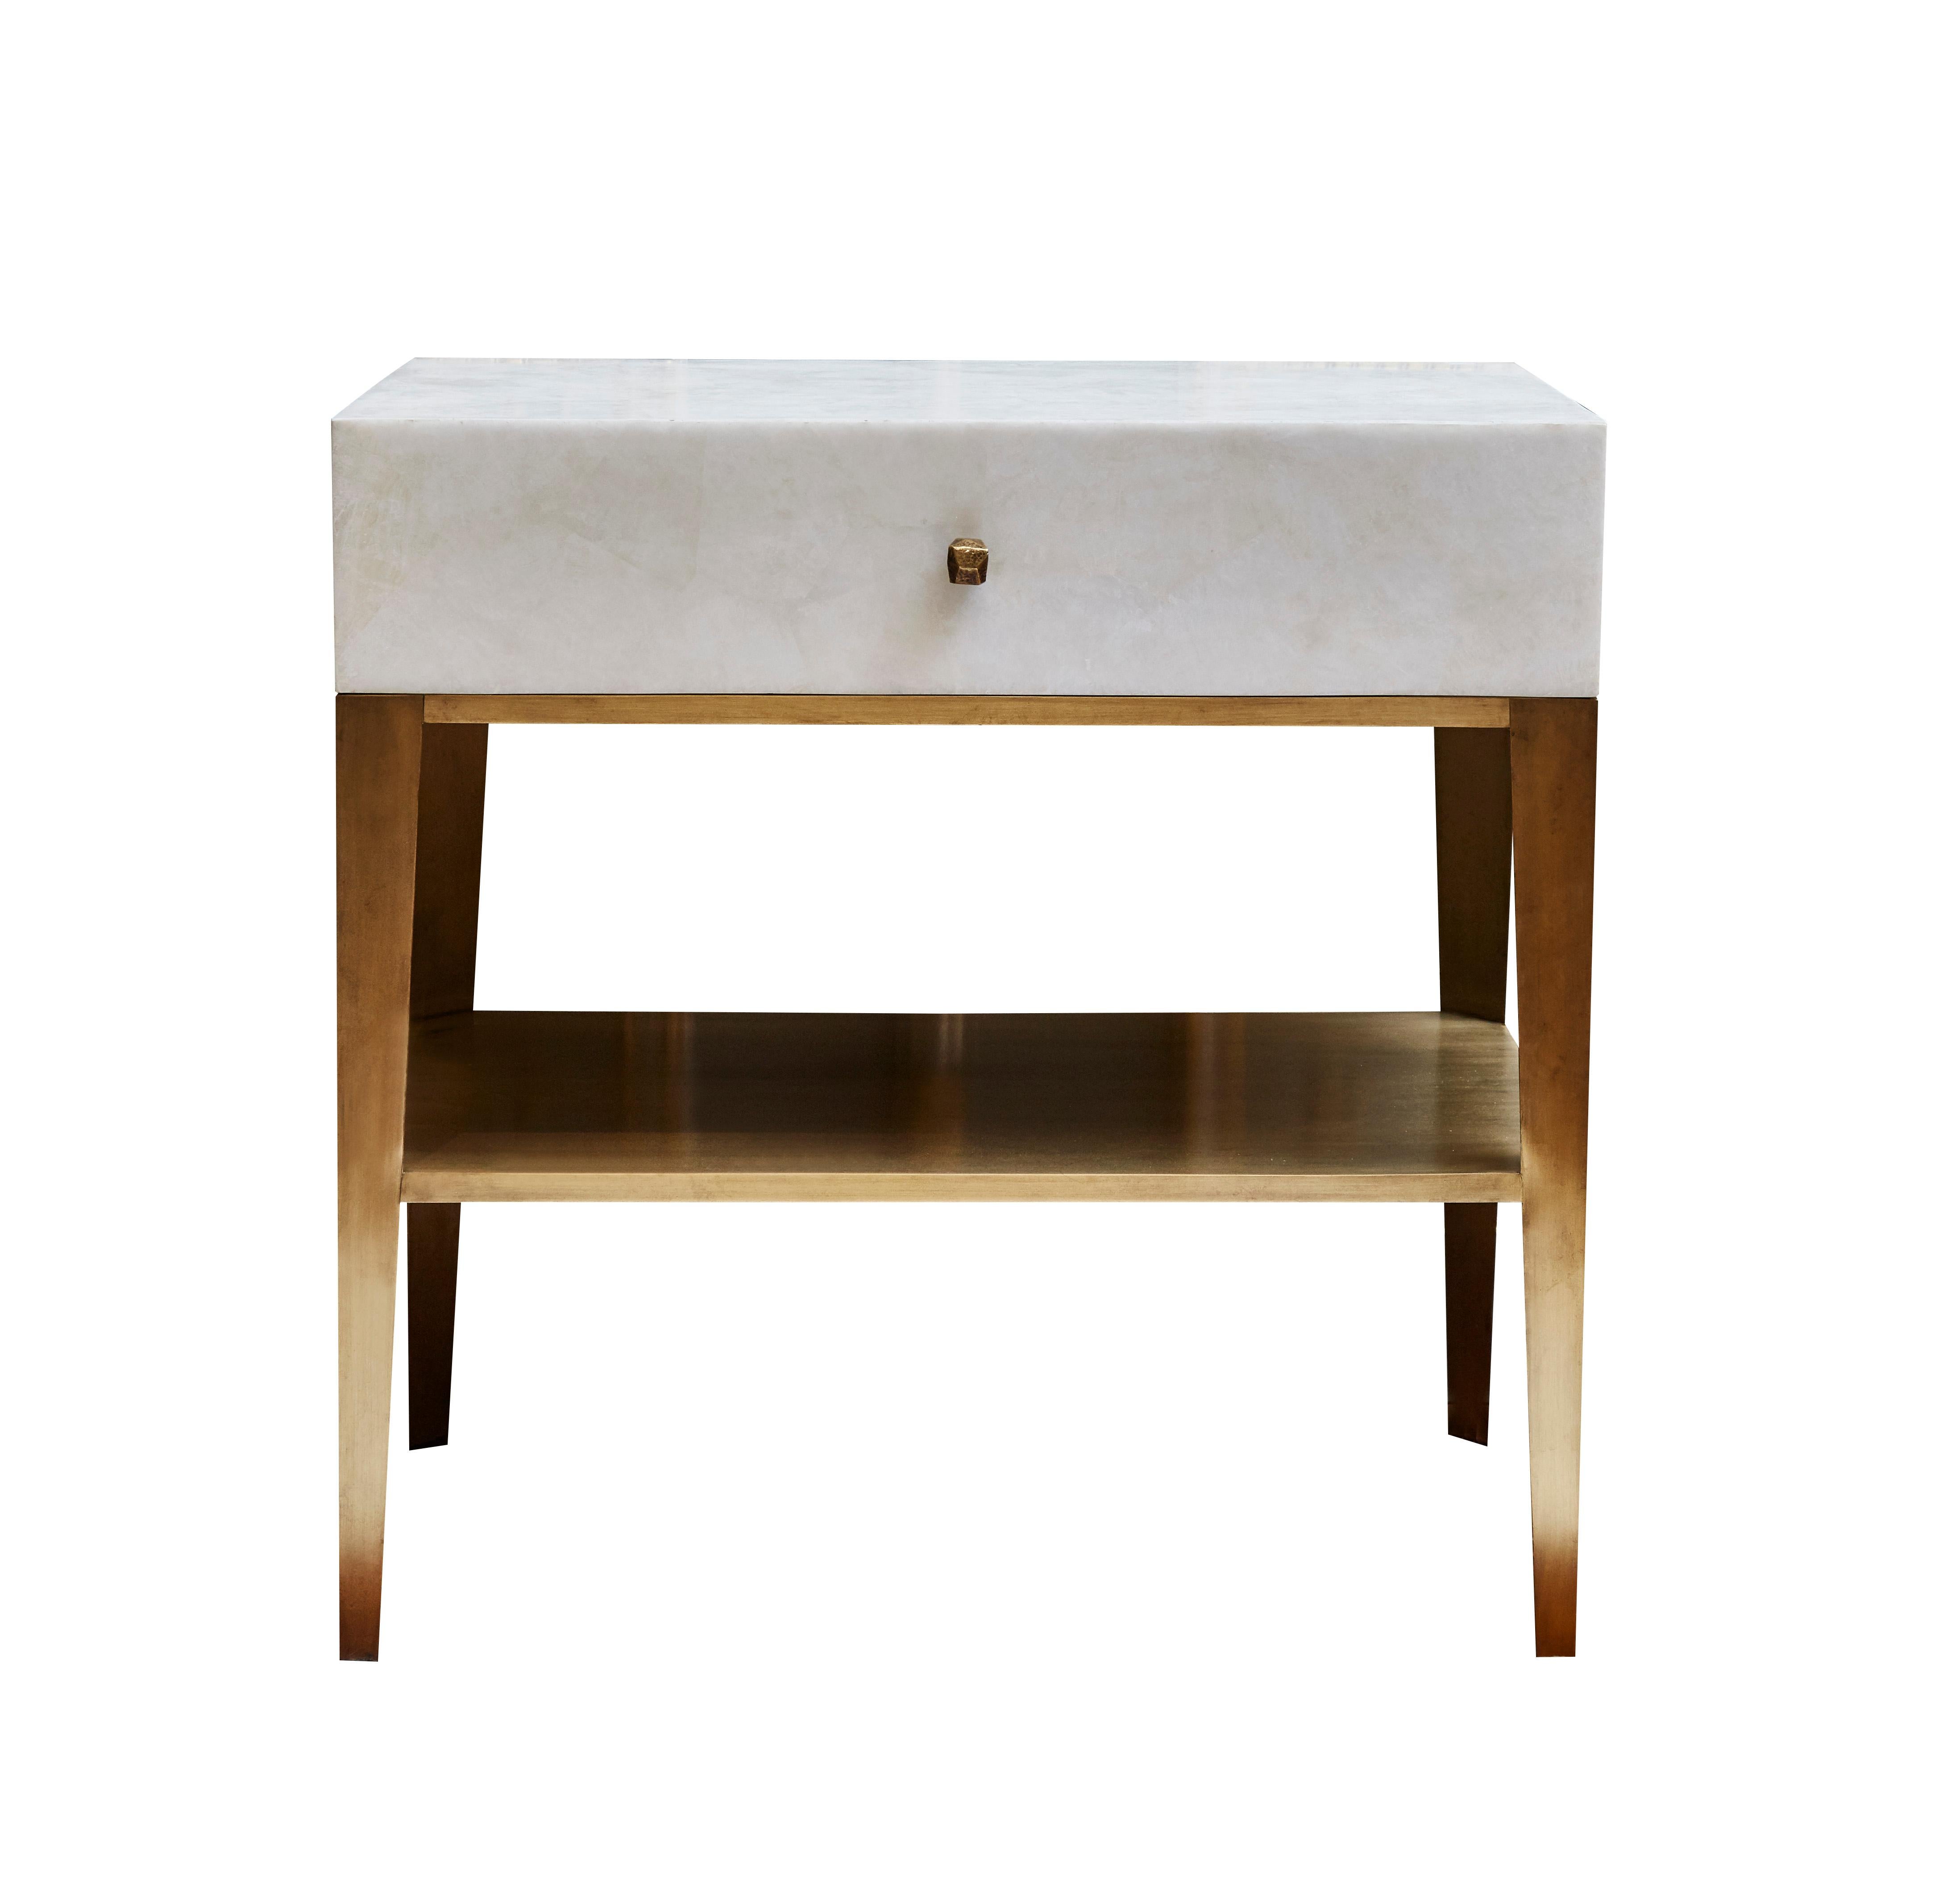 This pair of bedside tables are made in brass and rock crystal, it has one-drawer. Modern creation by Studio Glustin.